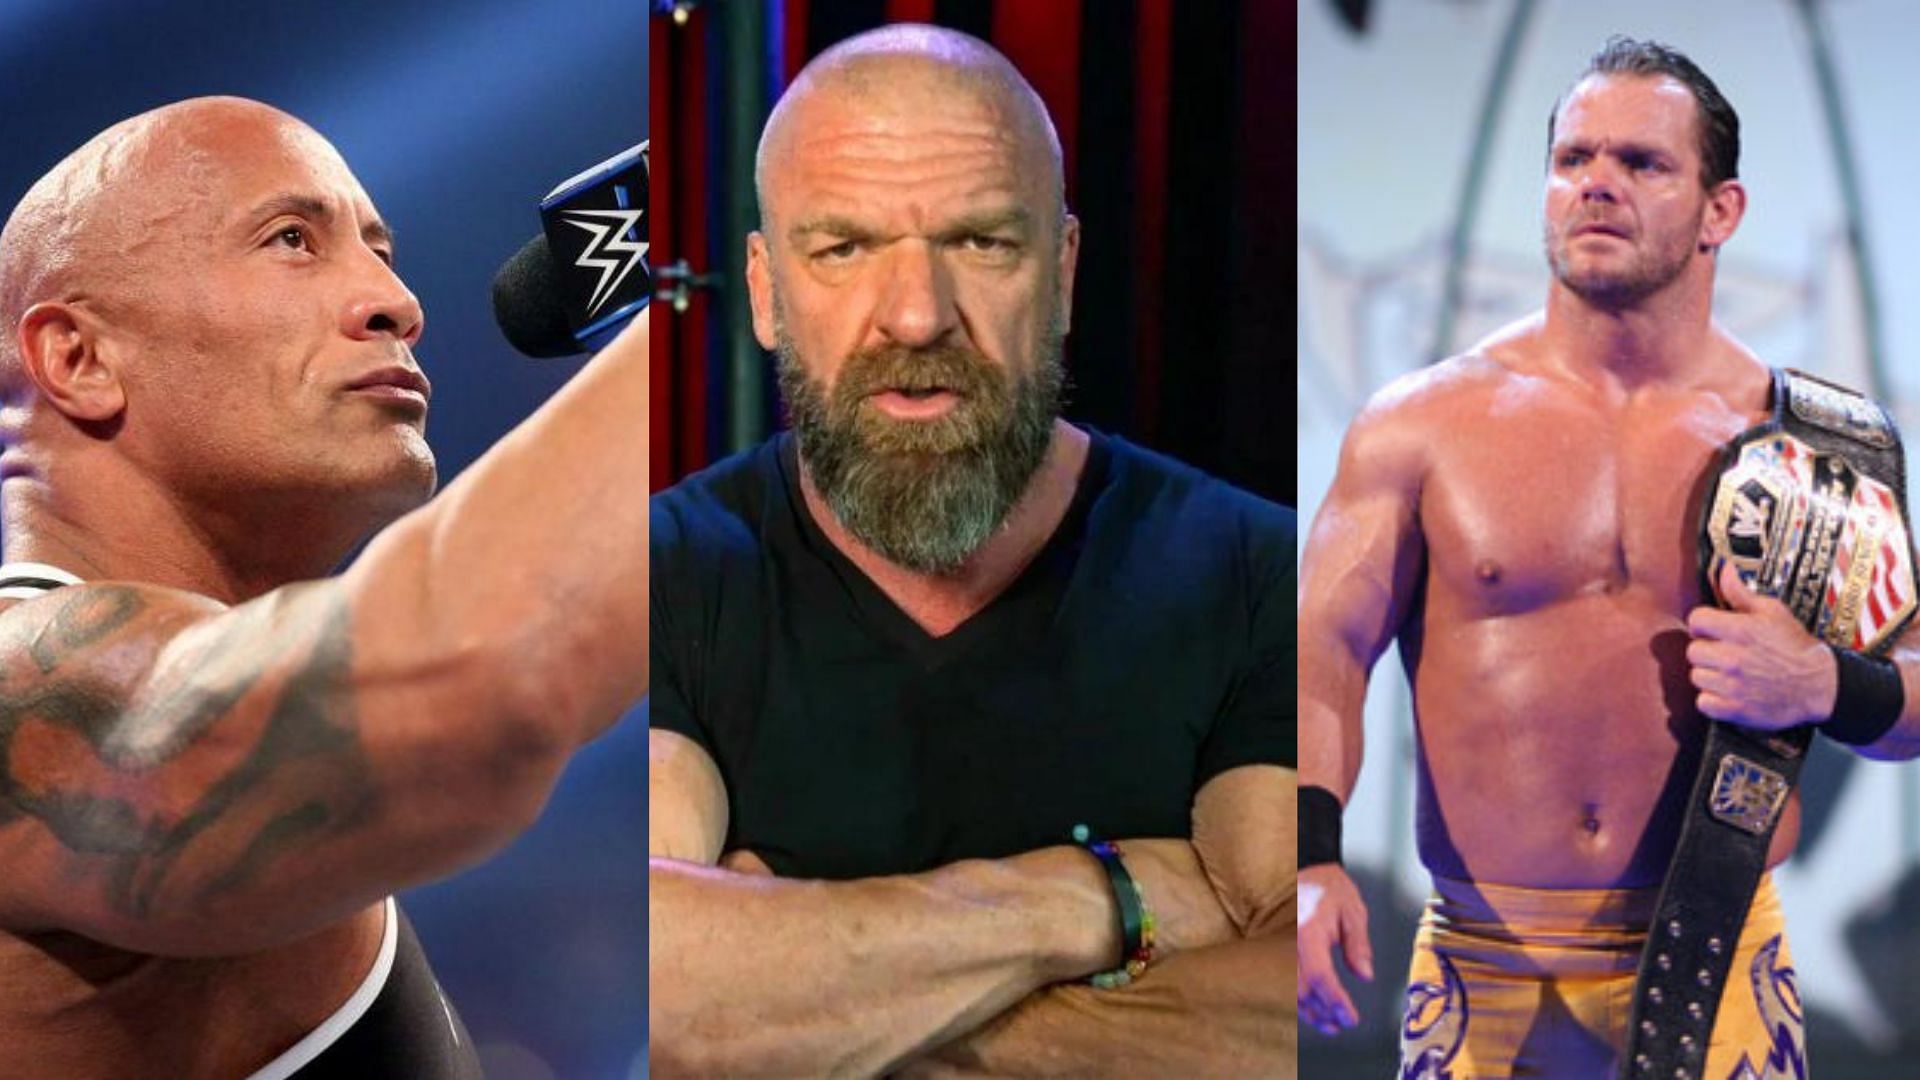 A WWE legend recently posted a rare video featuring numerous big names